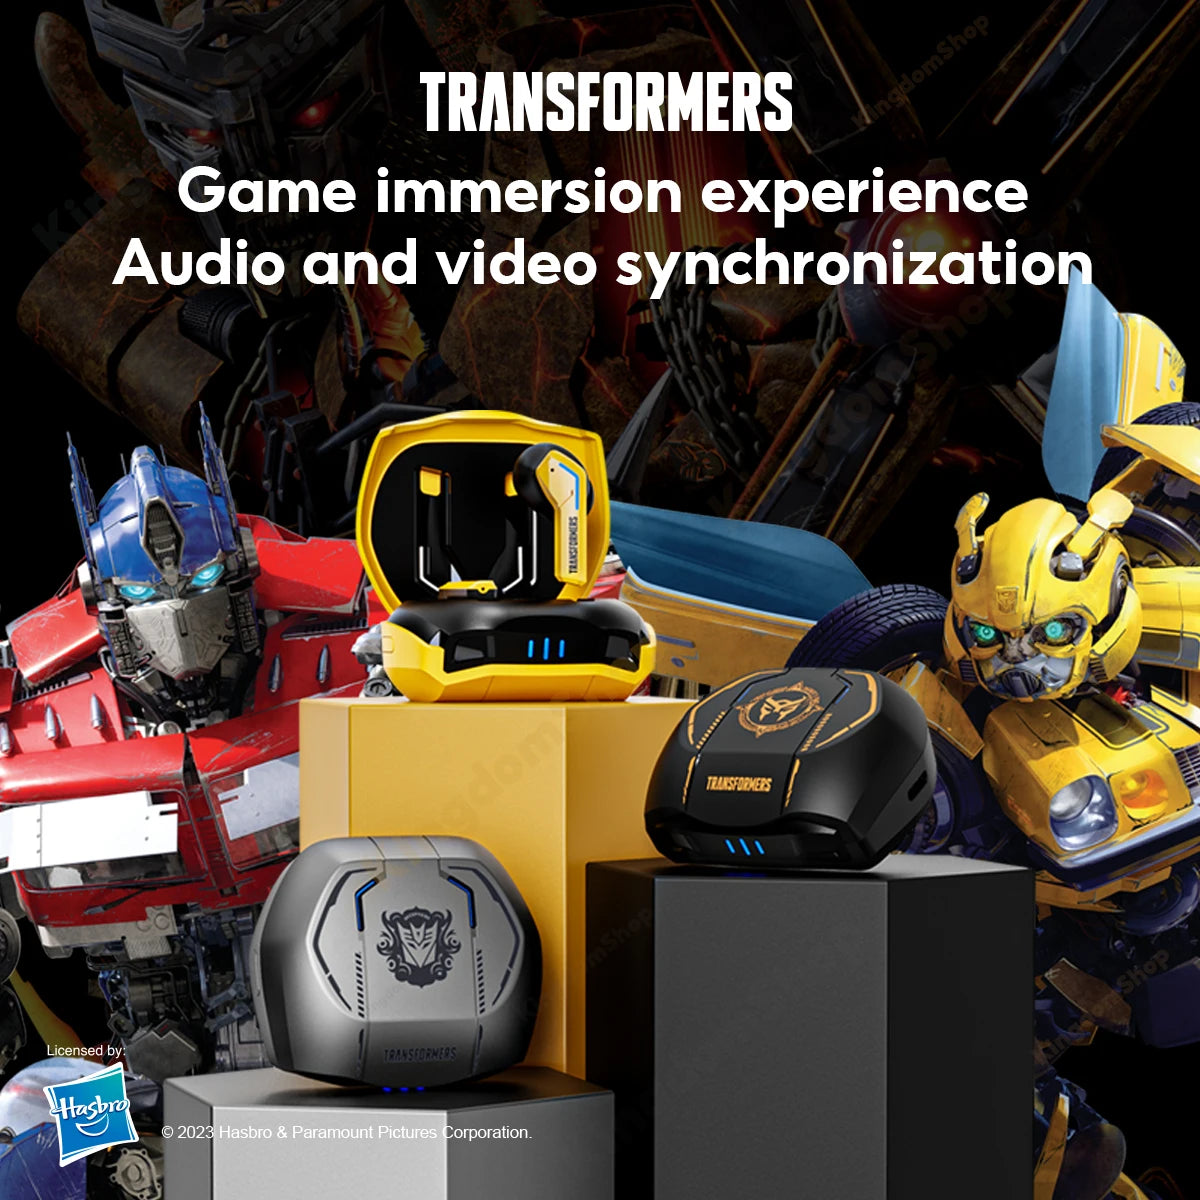 TRANSFORMERS TF-T06 Wireless Bluetooth 5.3 Gaming Earphones Low Latency Noise Reduction Headphones Music Choice Earbuds Gamer